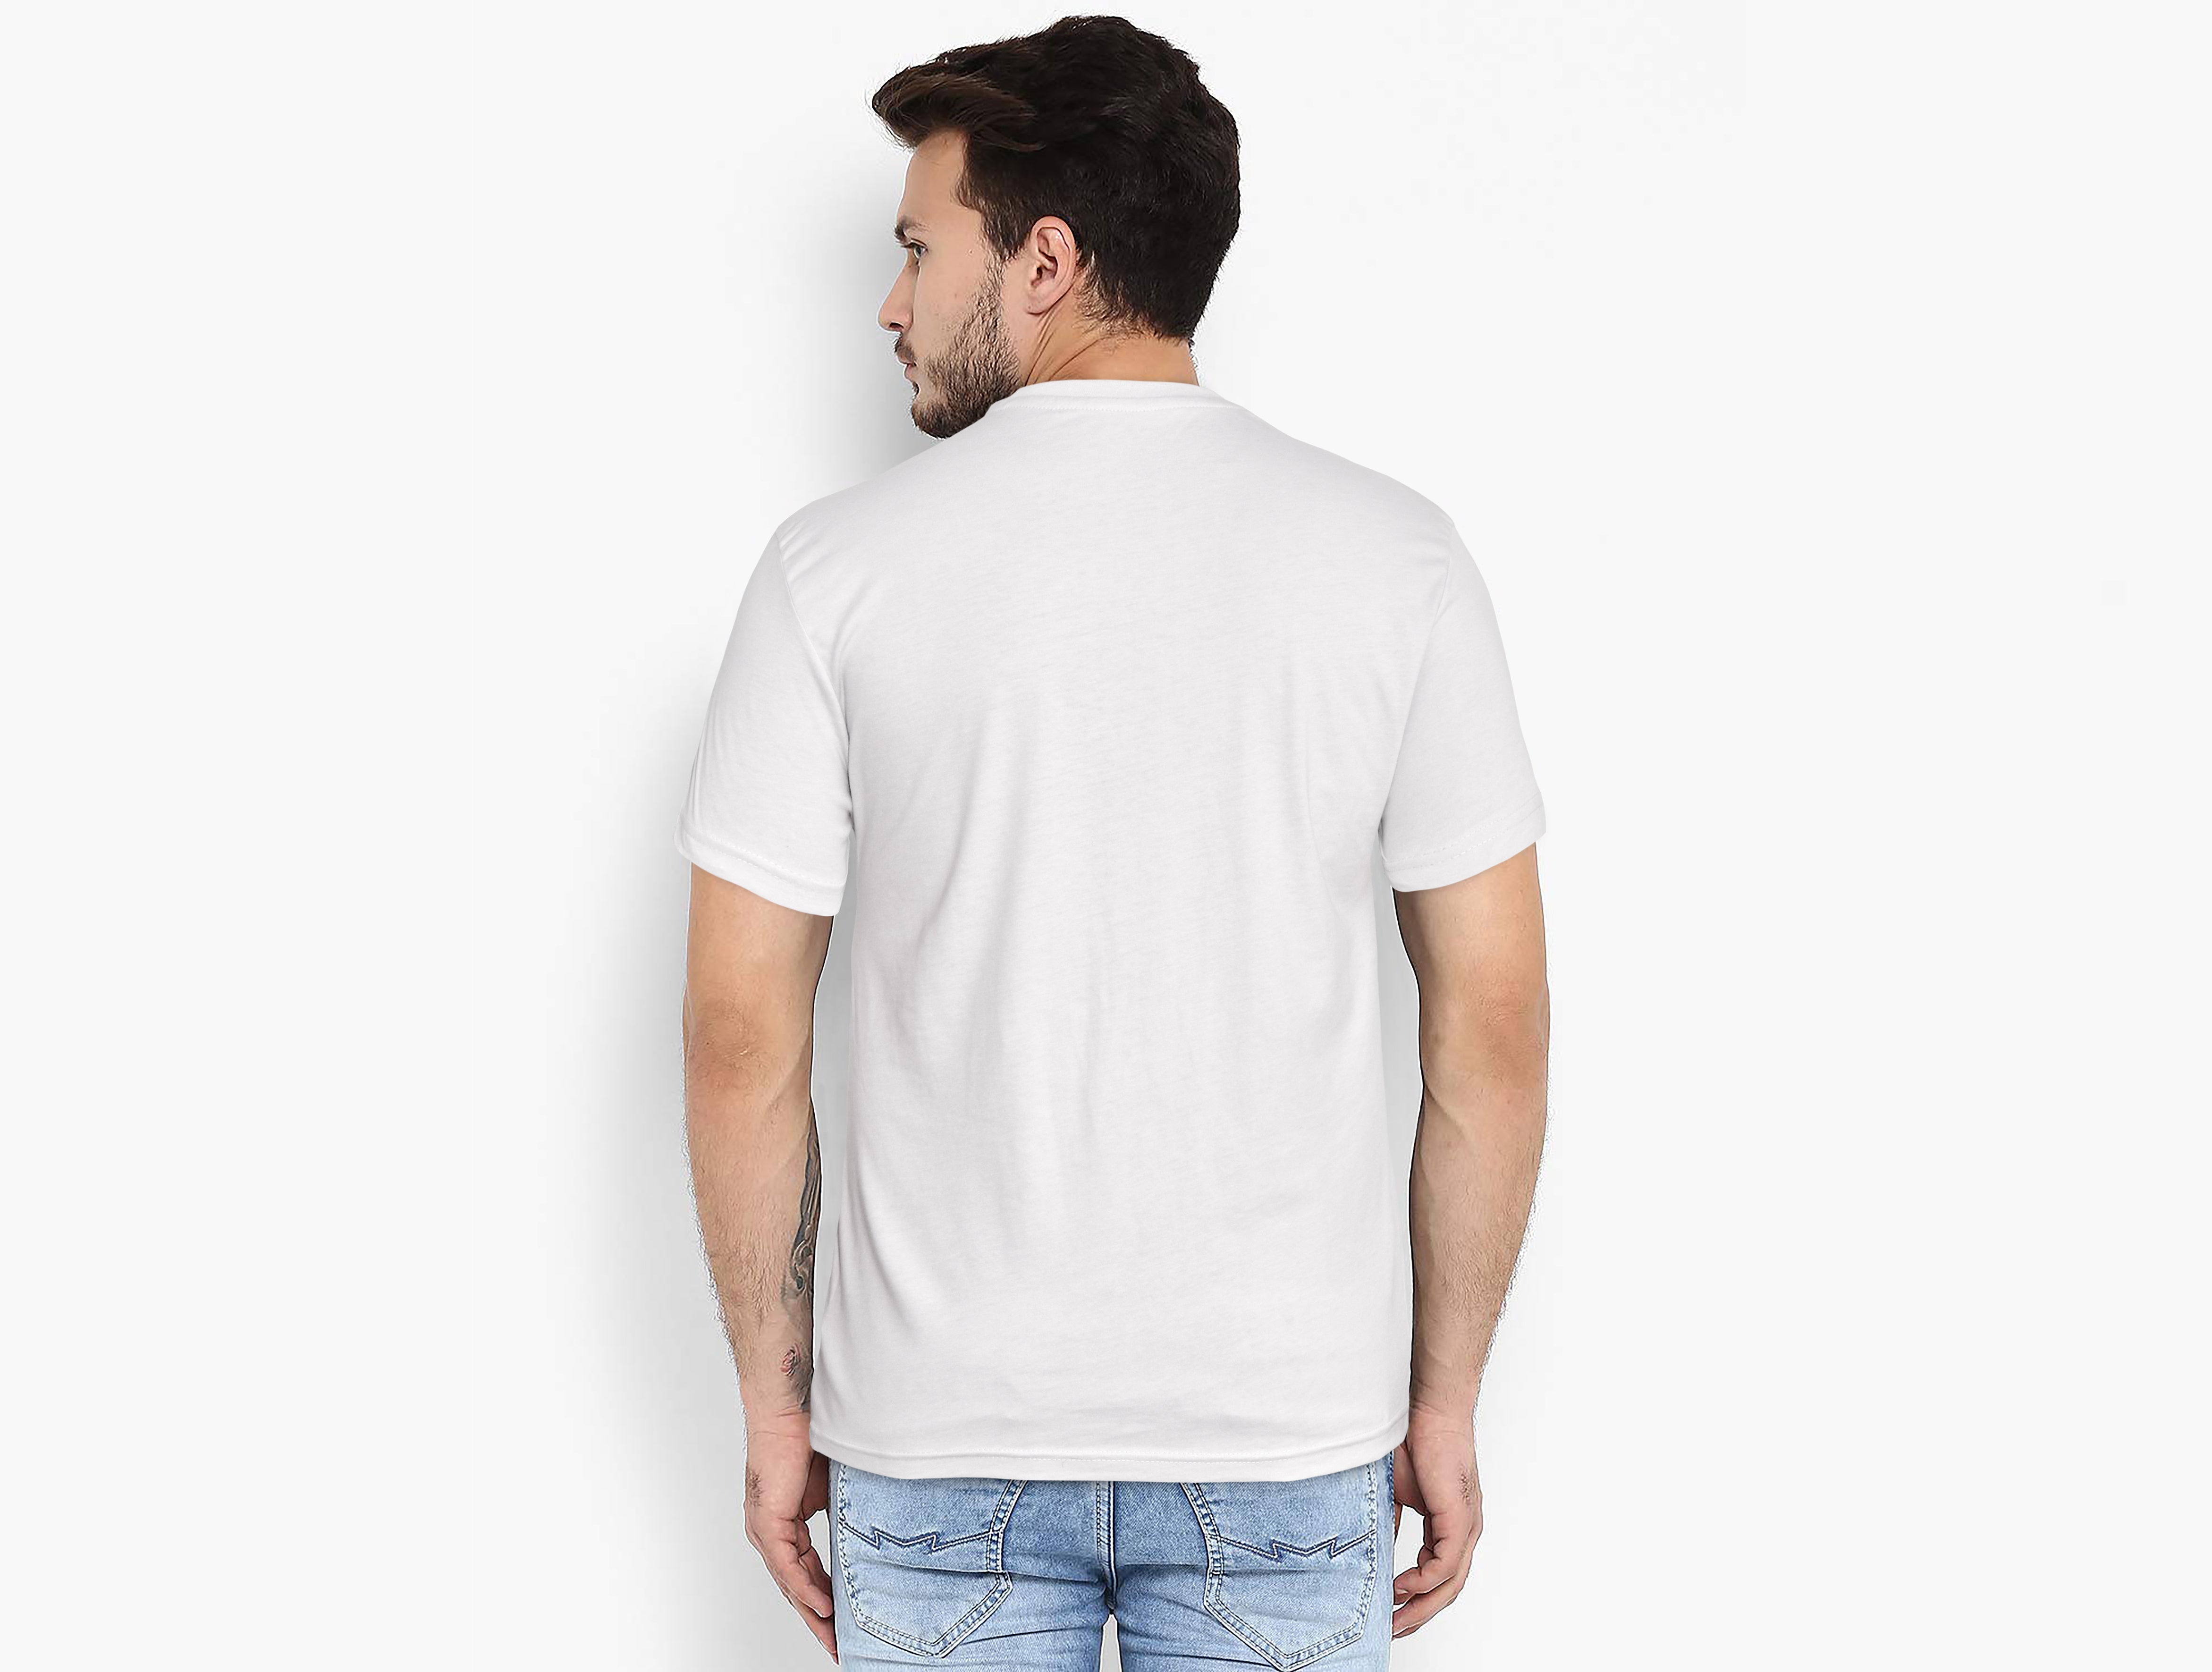 Cotton Blend Crew Neck Tees, Pack of 4